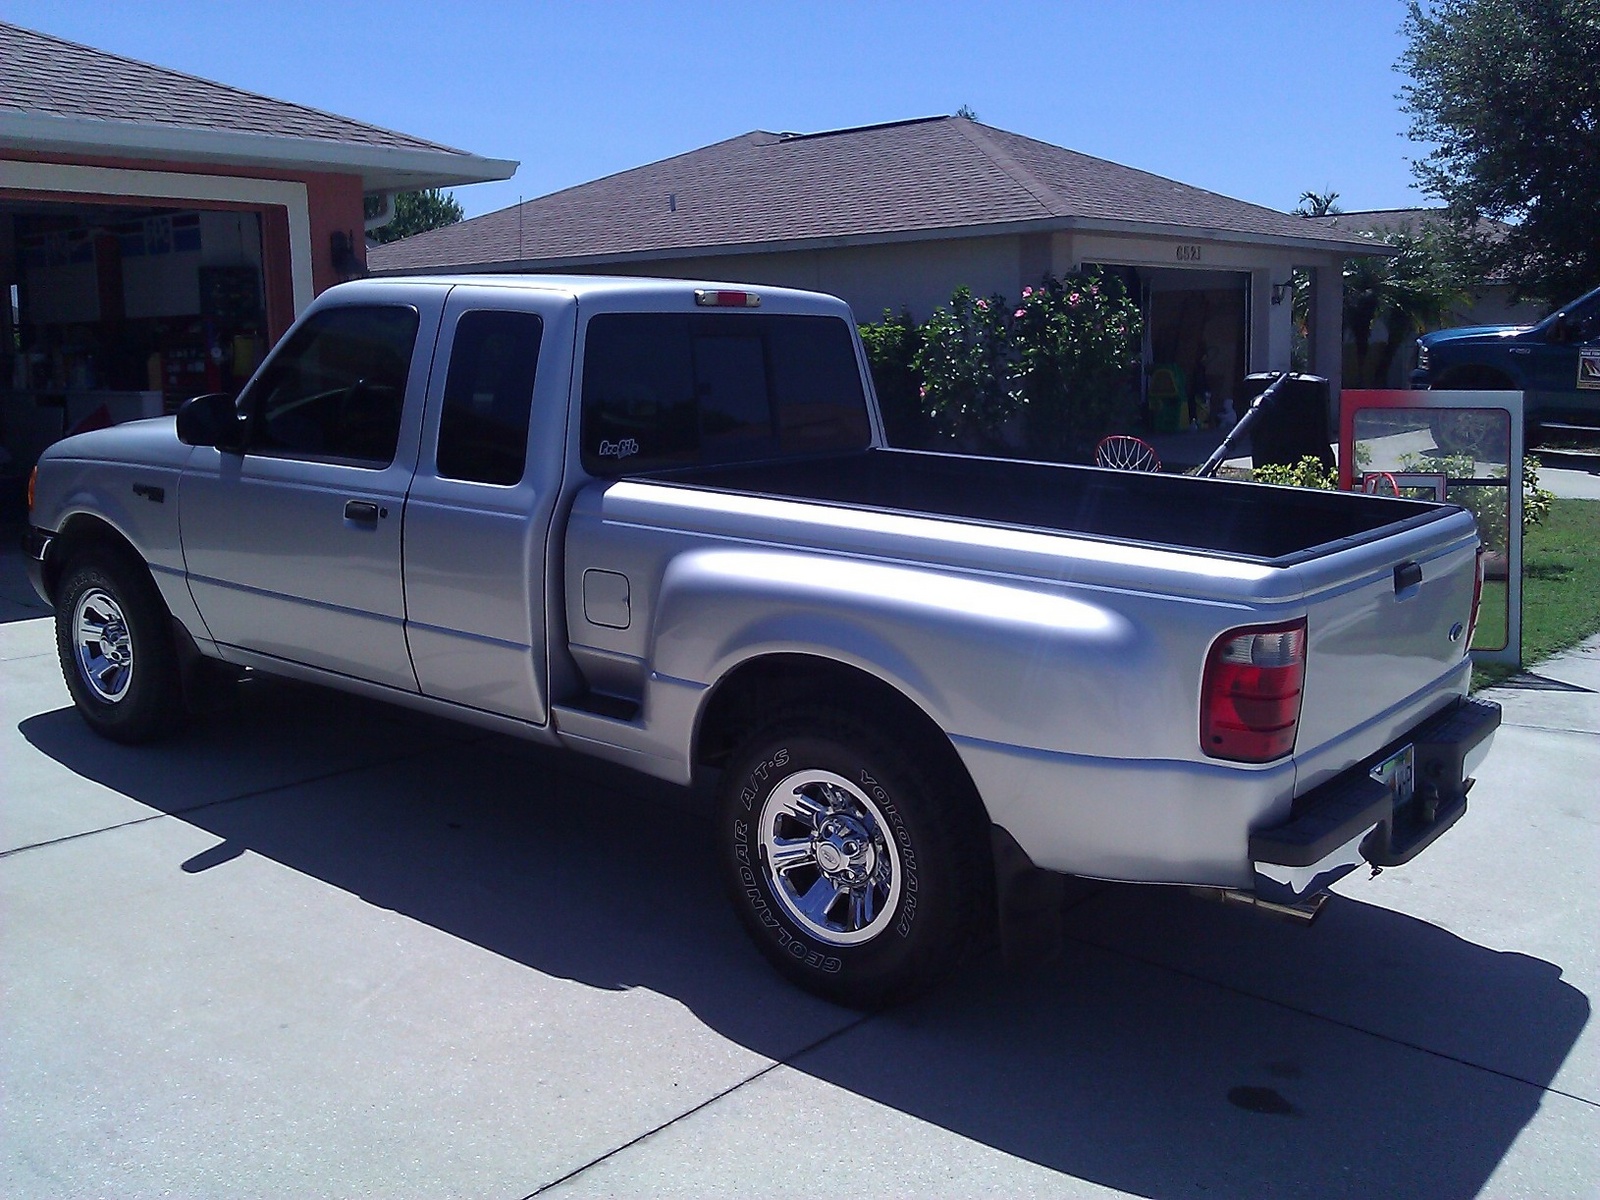 2002 Ford ranger extended cab weight #7